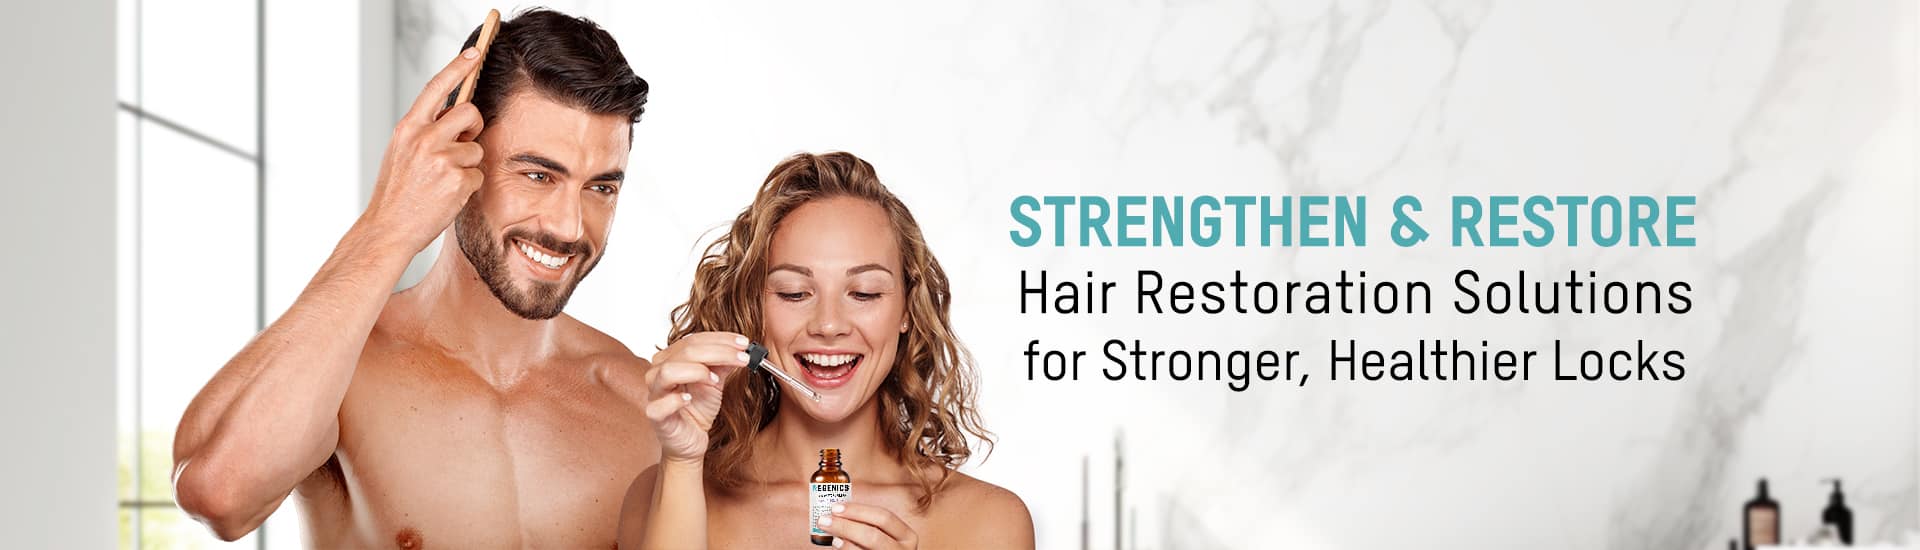 A smiling man and woman promoting REGENICS hair restoration products for stronger, healthier hair.